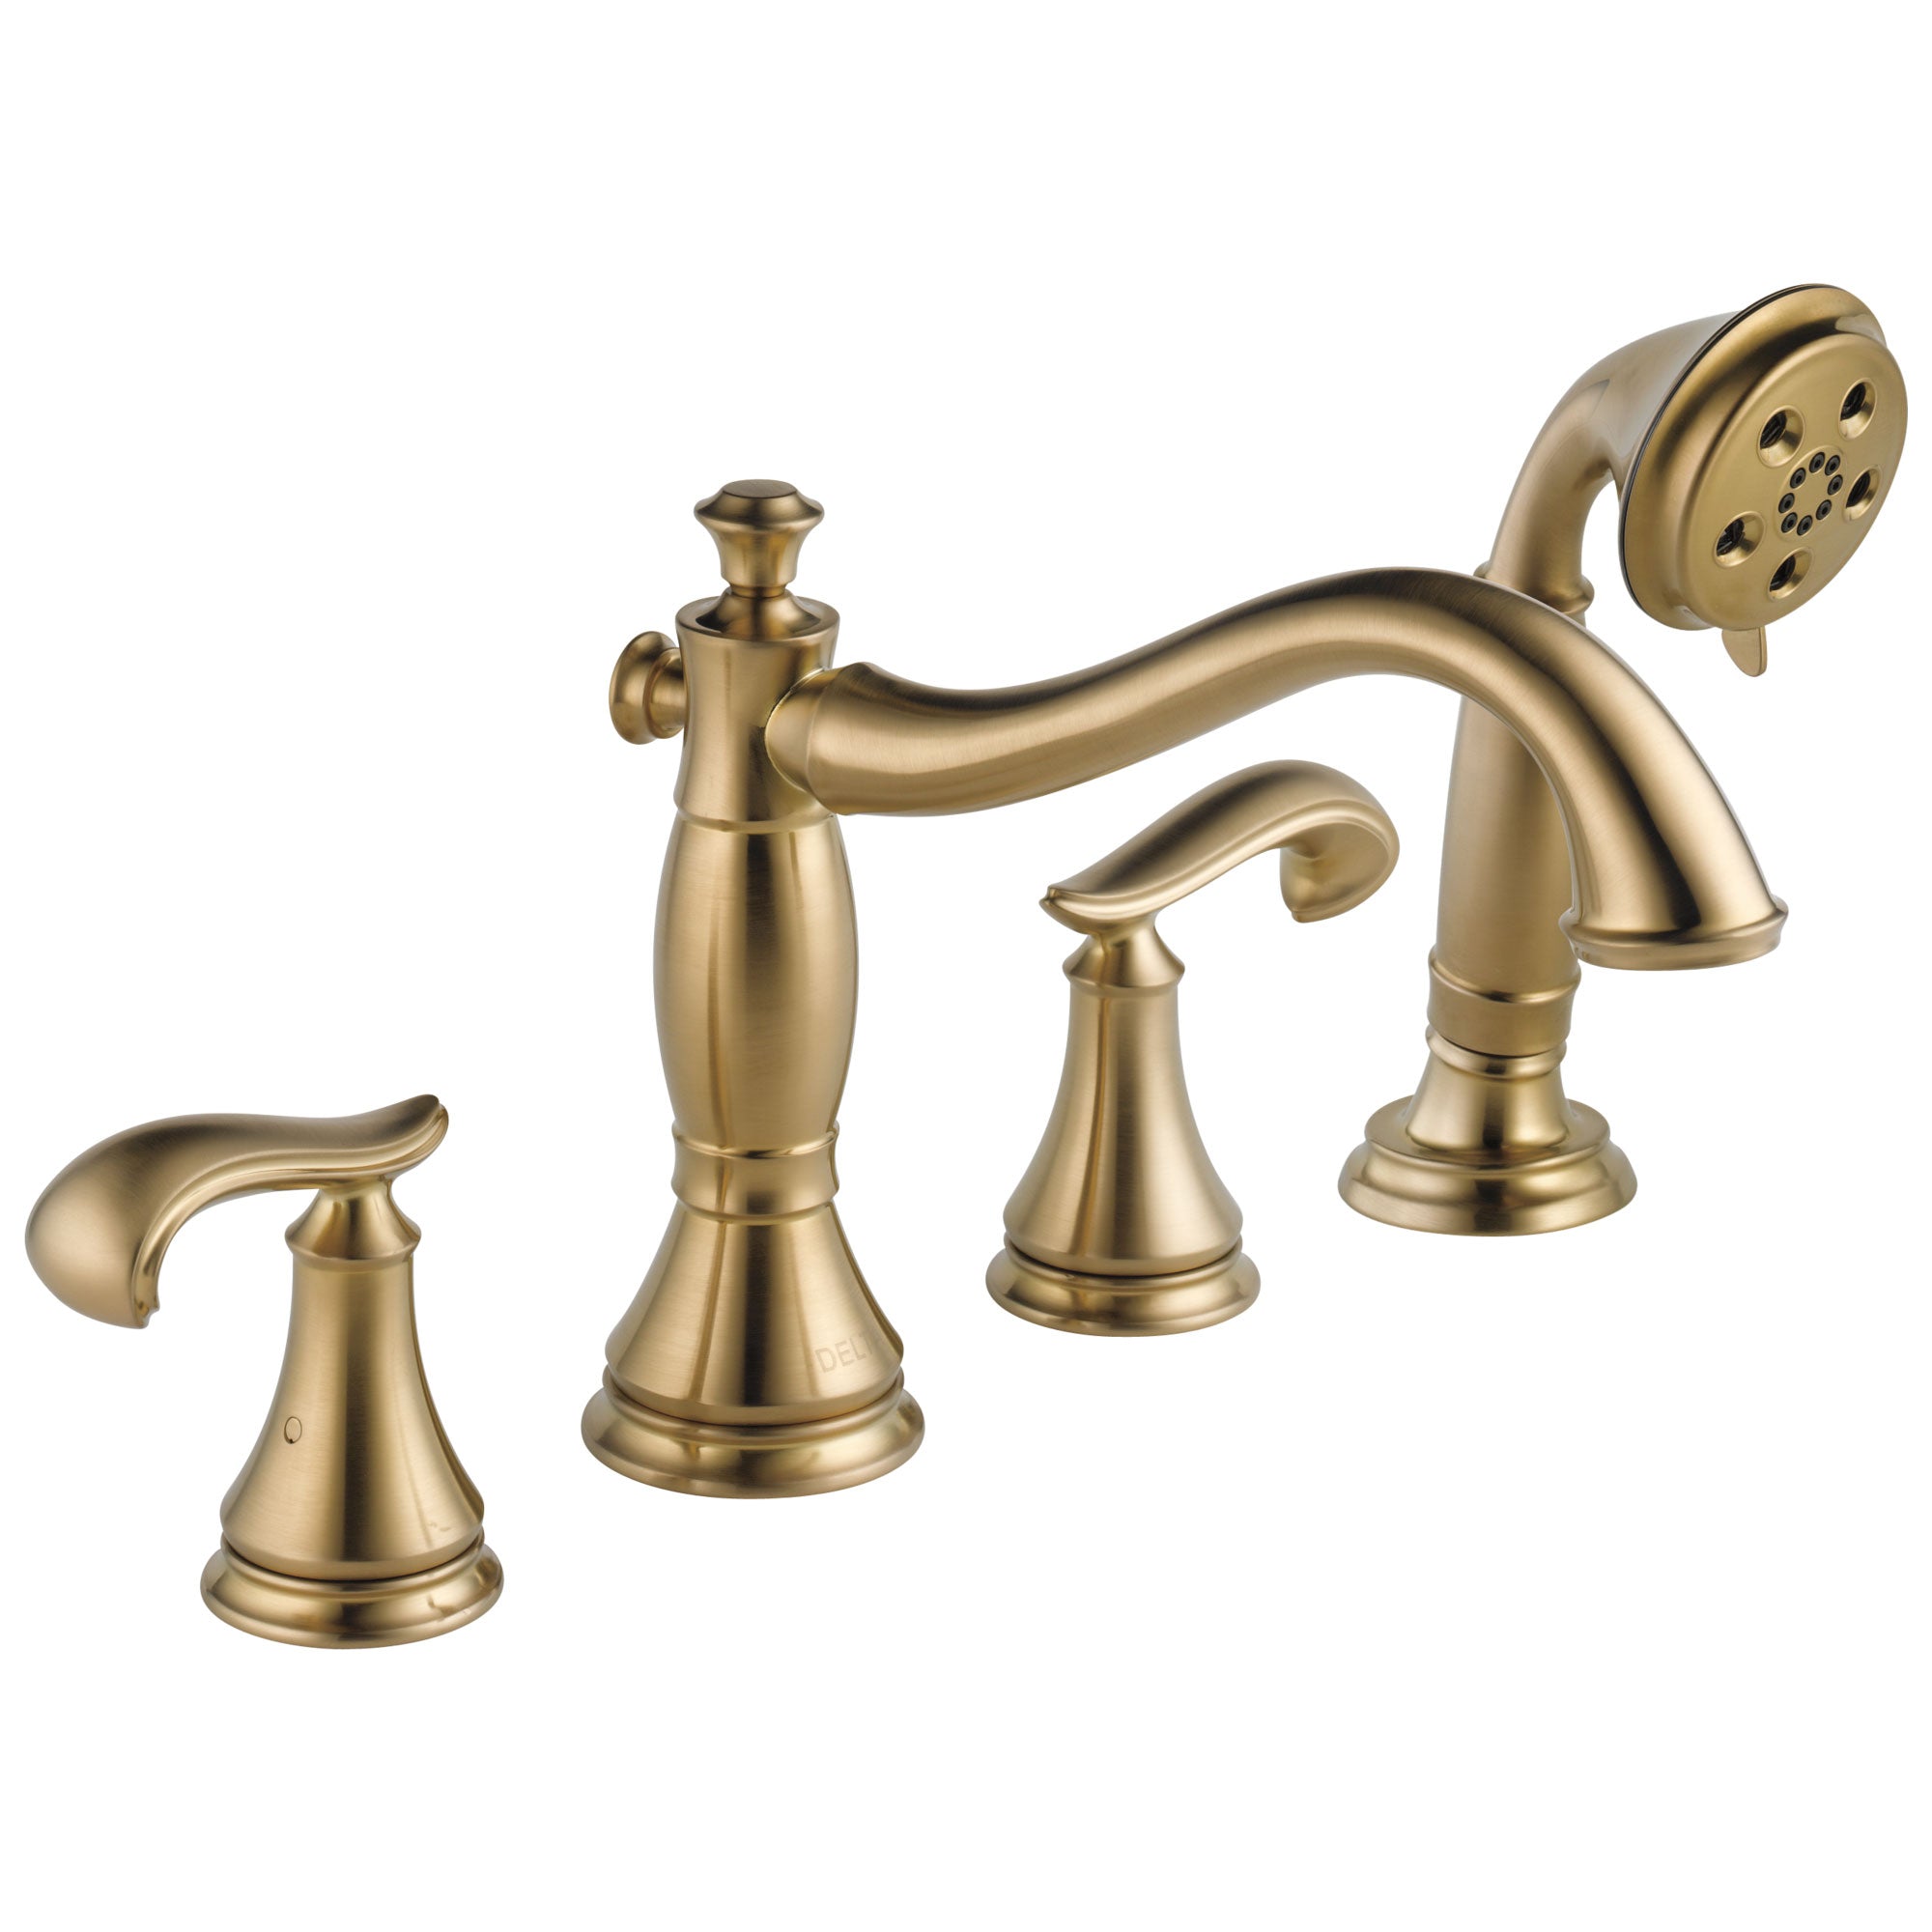 Delta Cassidy Collection Champagne Bronze Finish Roman Tub Filler Faucet with Hand Shower INCLUDES (2) French Scroll Levers and Rough-in Valve D1402V